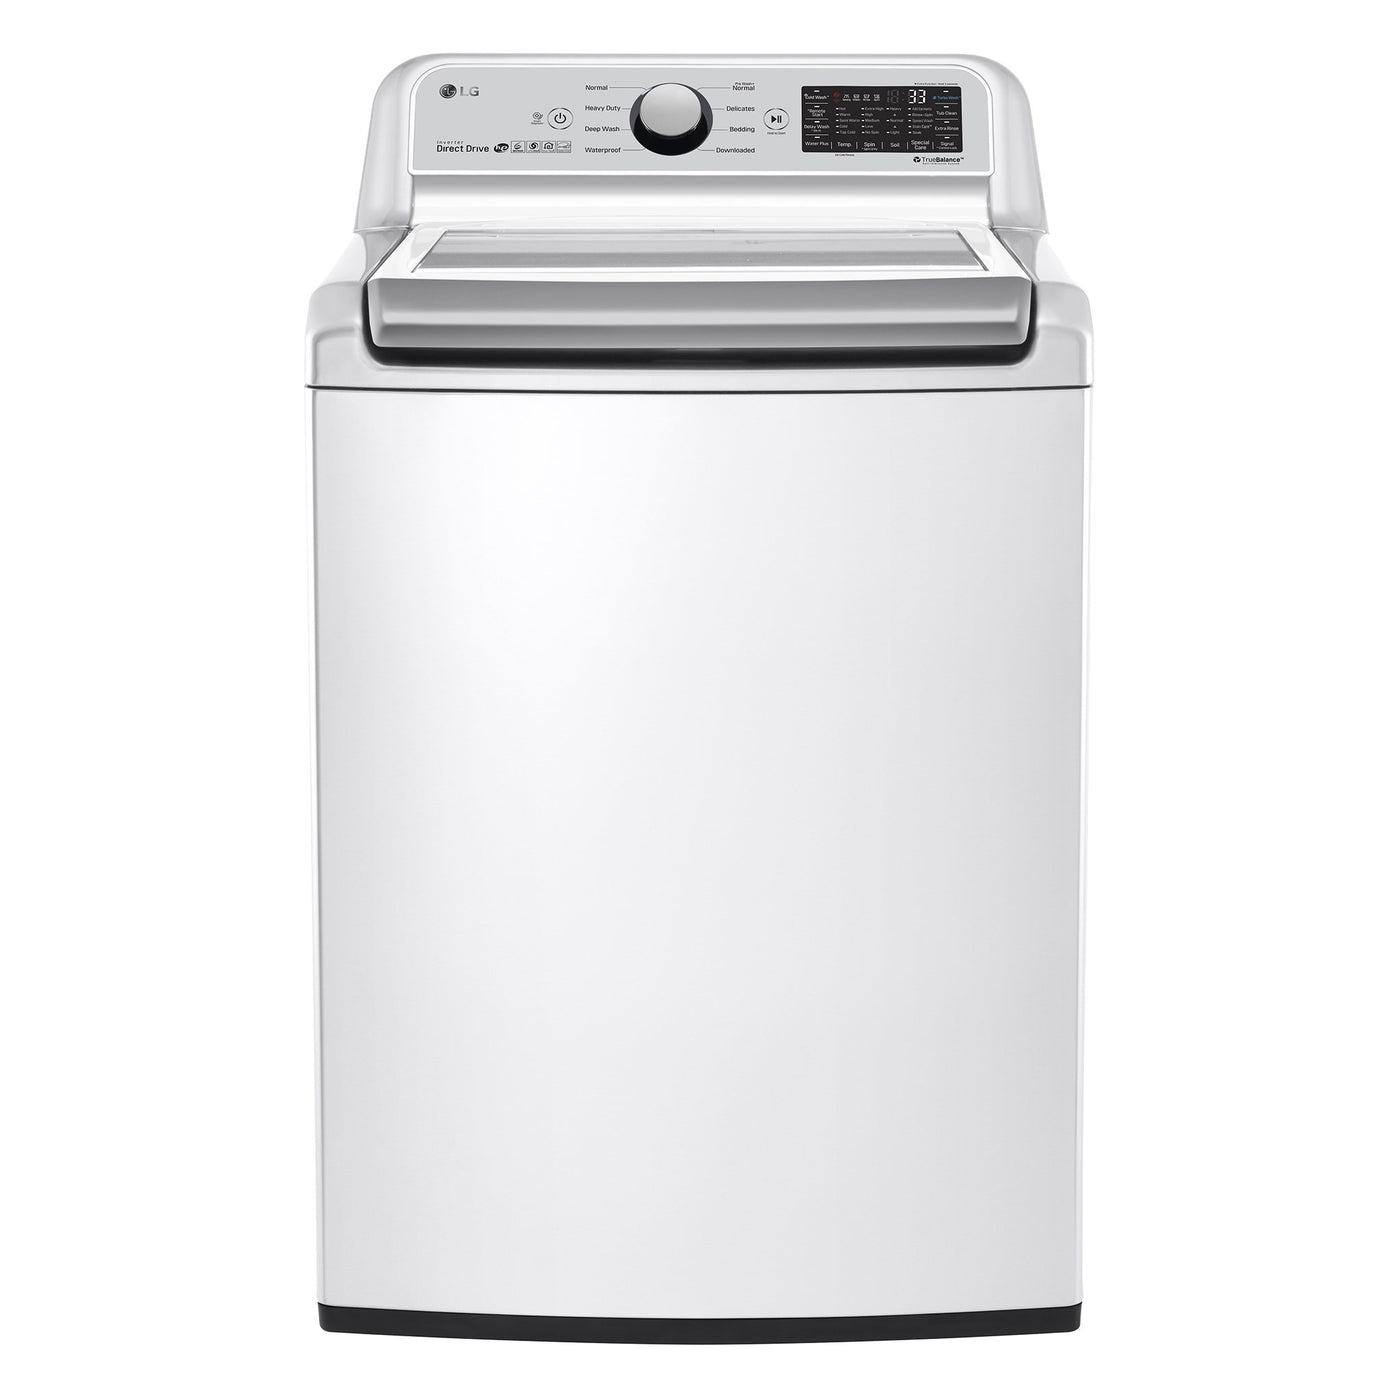 LG White Top-Load Washer (5.8 Cu. Ft.) - WT7300CW